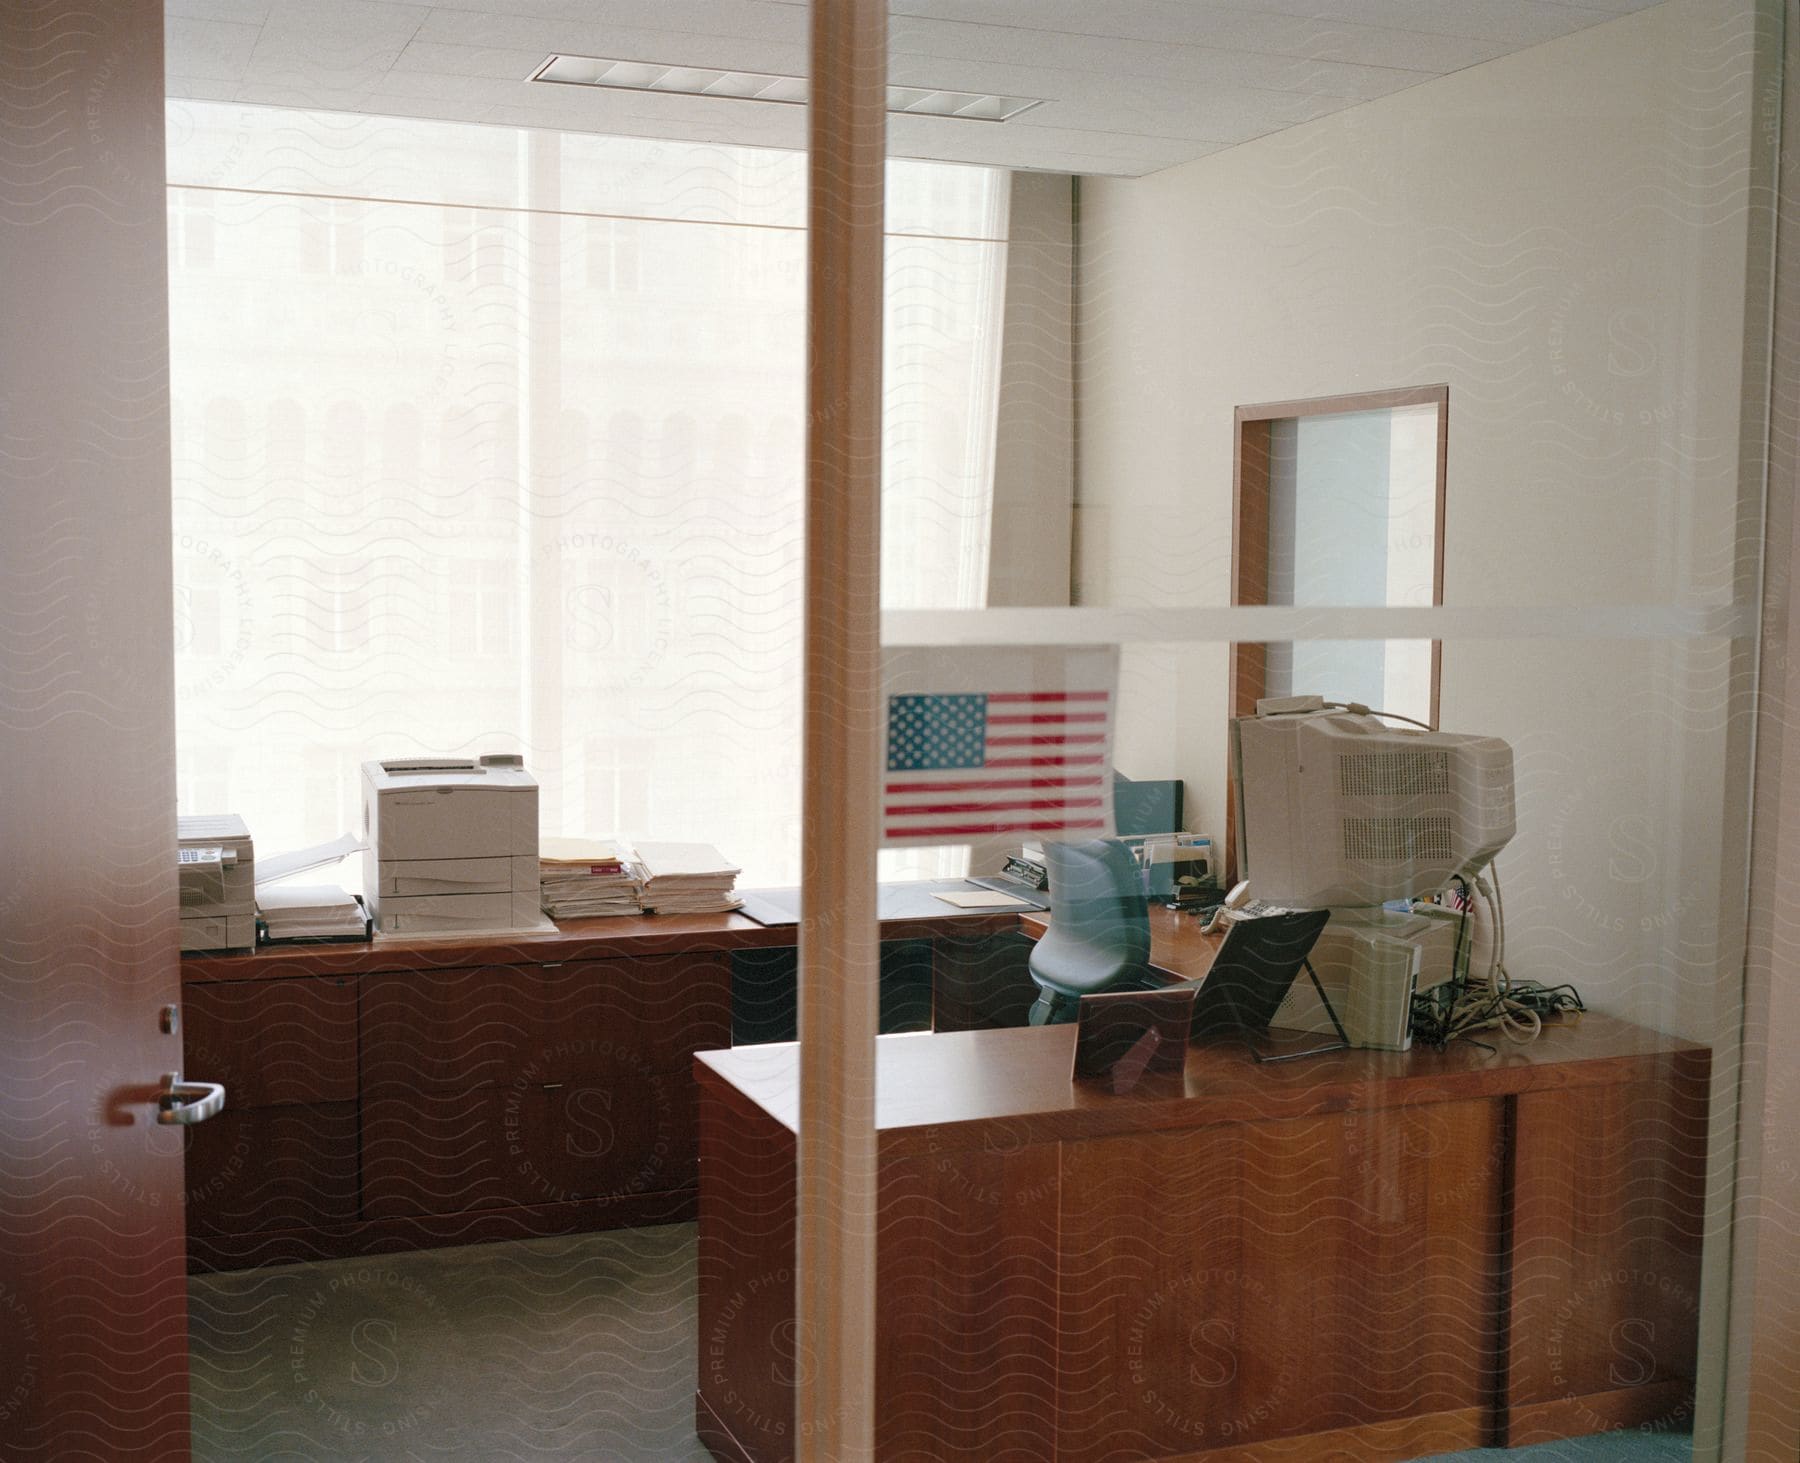 An office building with an american flag in the window a computer on the desk and a printer as well